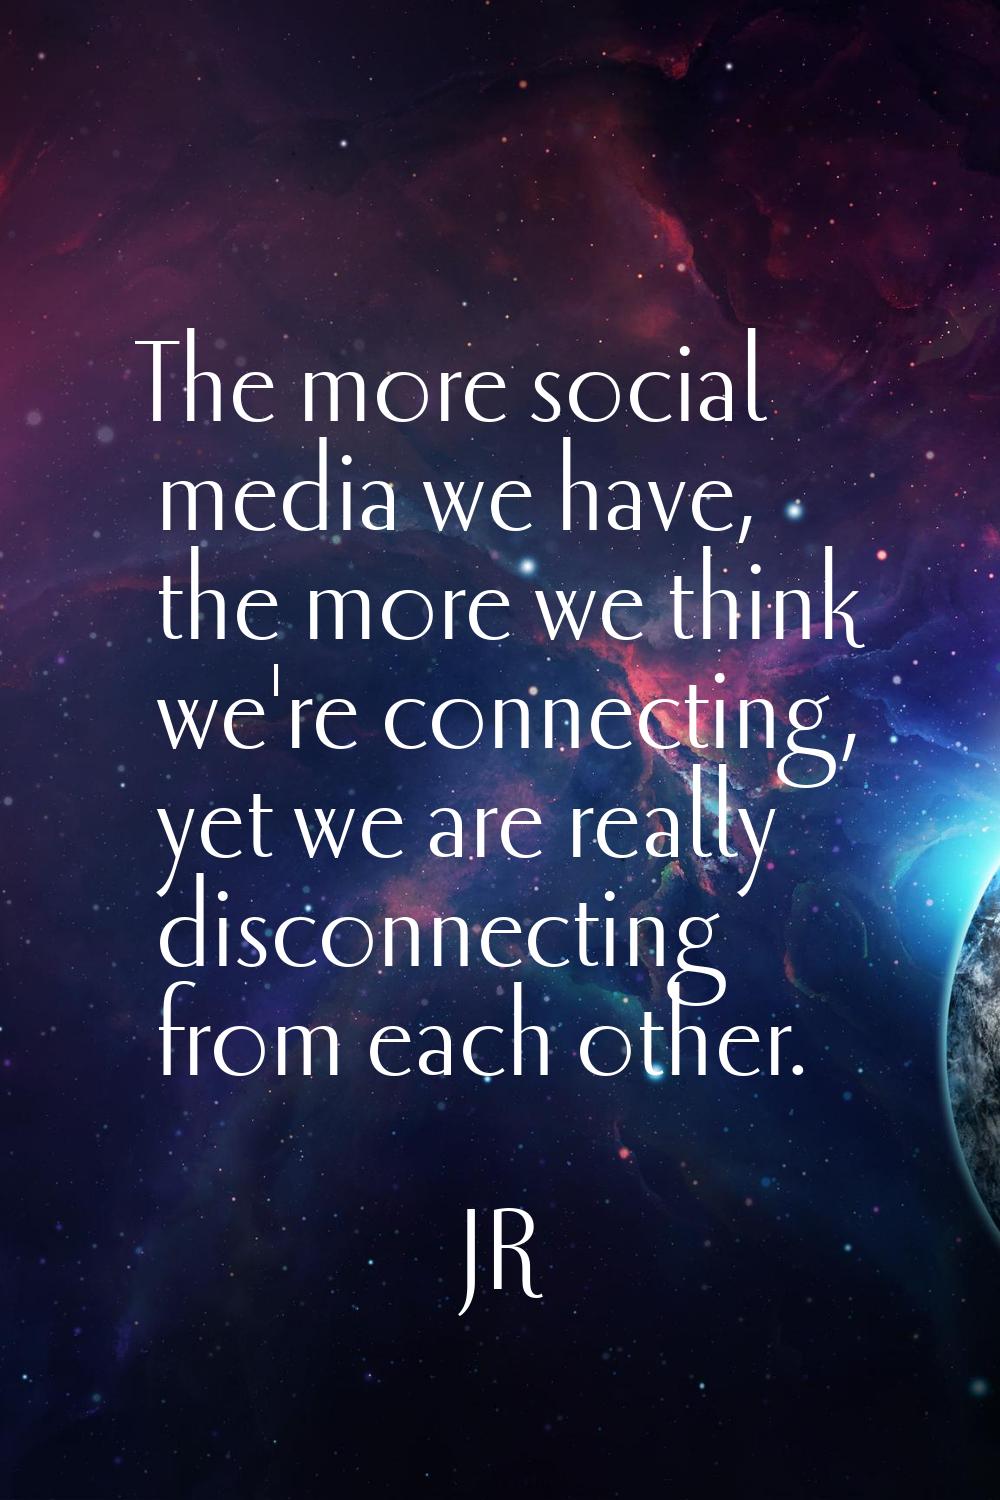 The more social media we have, the more we think we're connecting, yet we are really disconnecting 